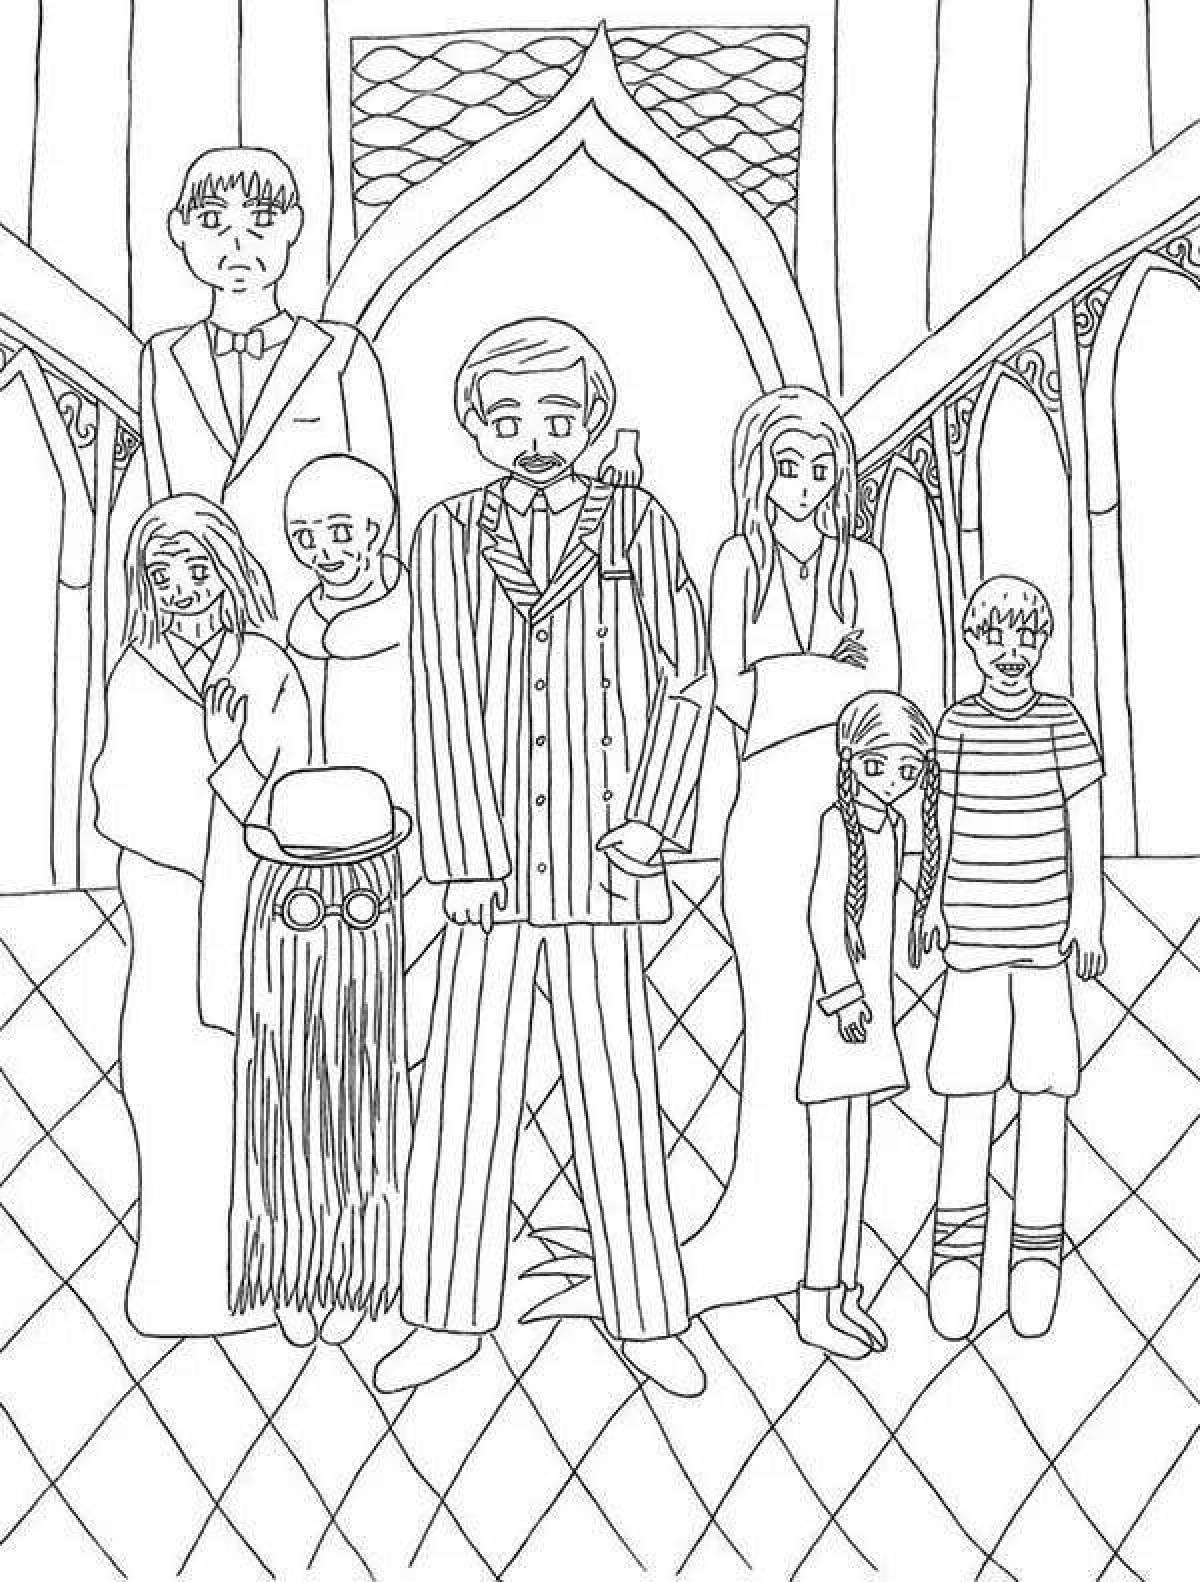 Funny Adams Wednesday coloring page